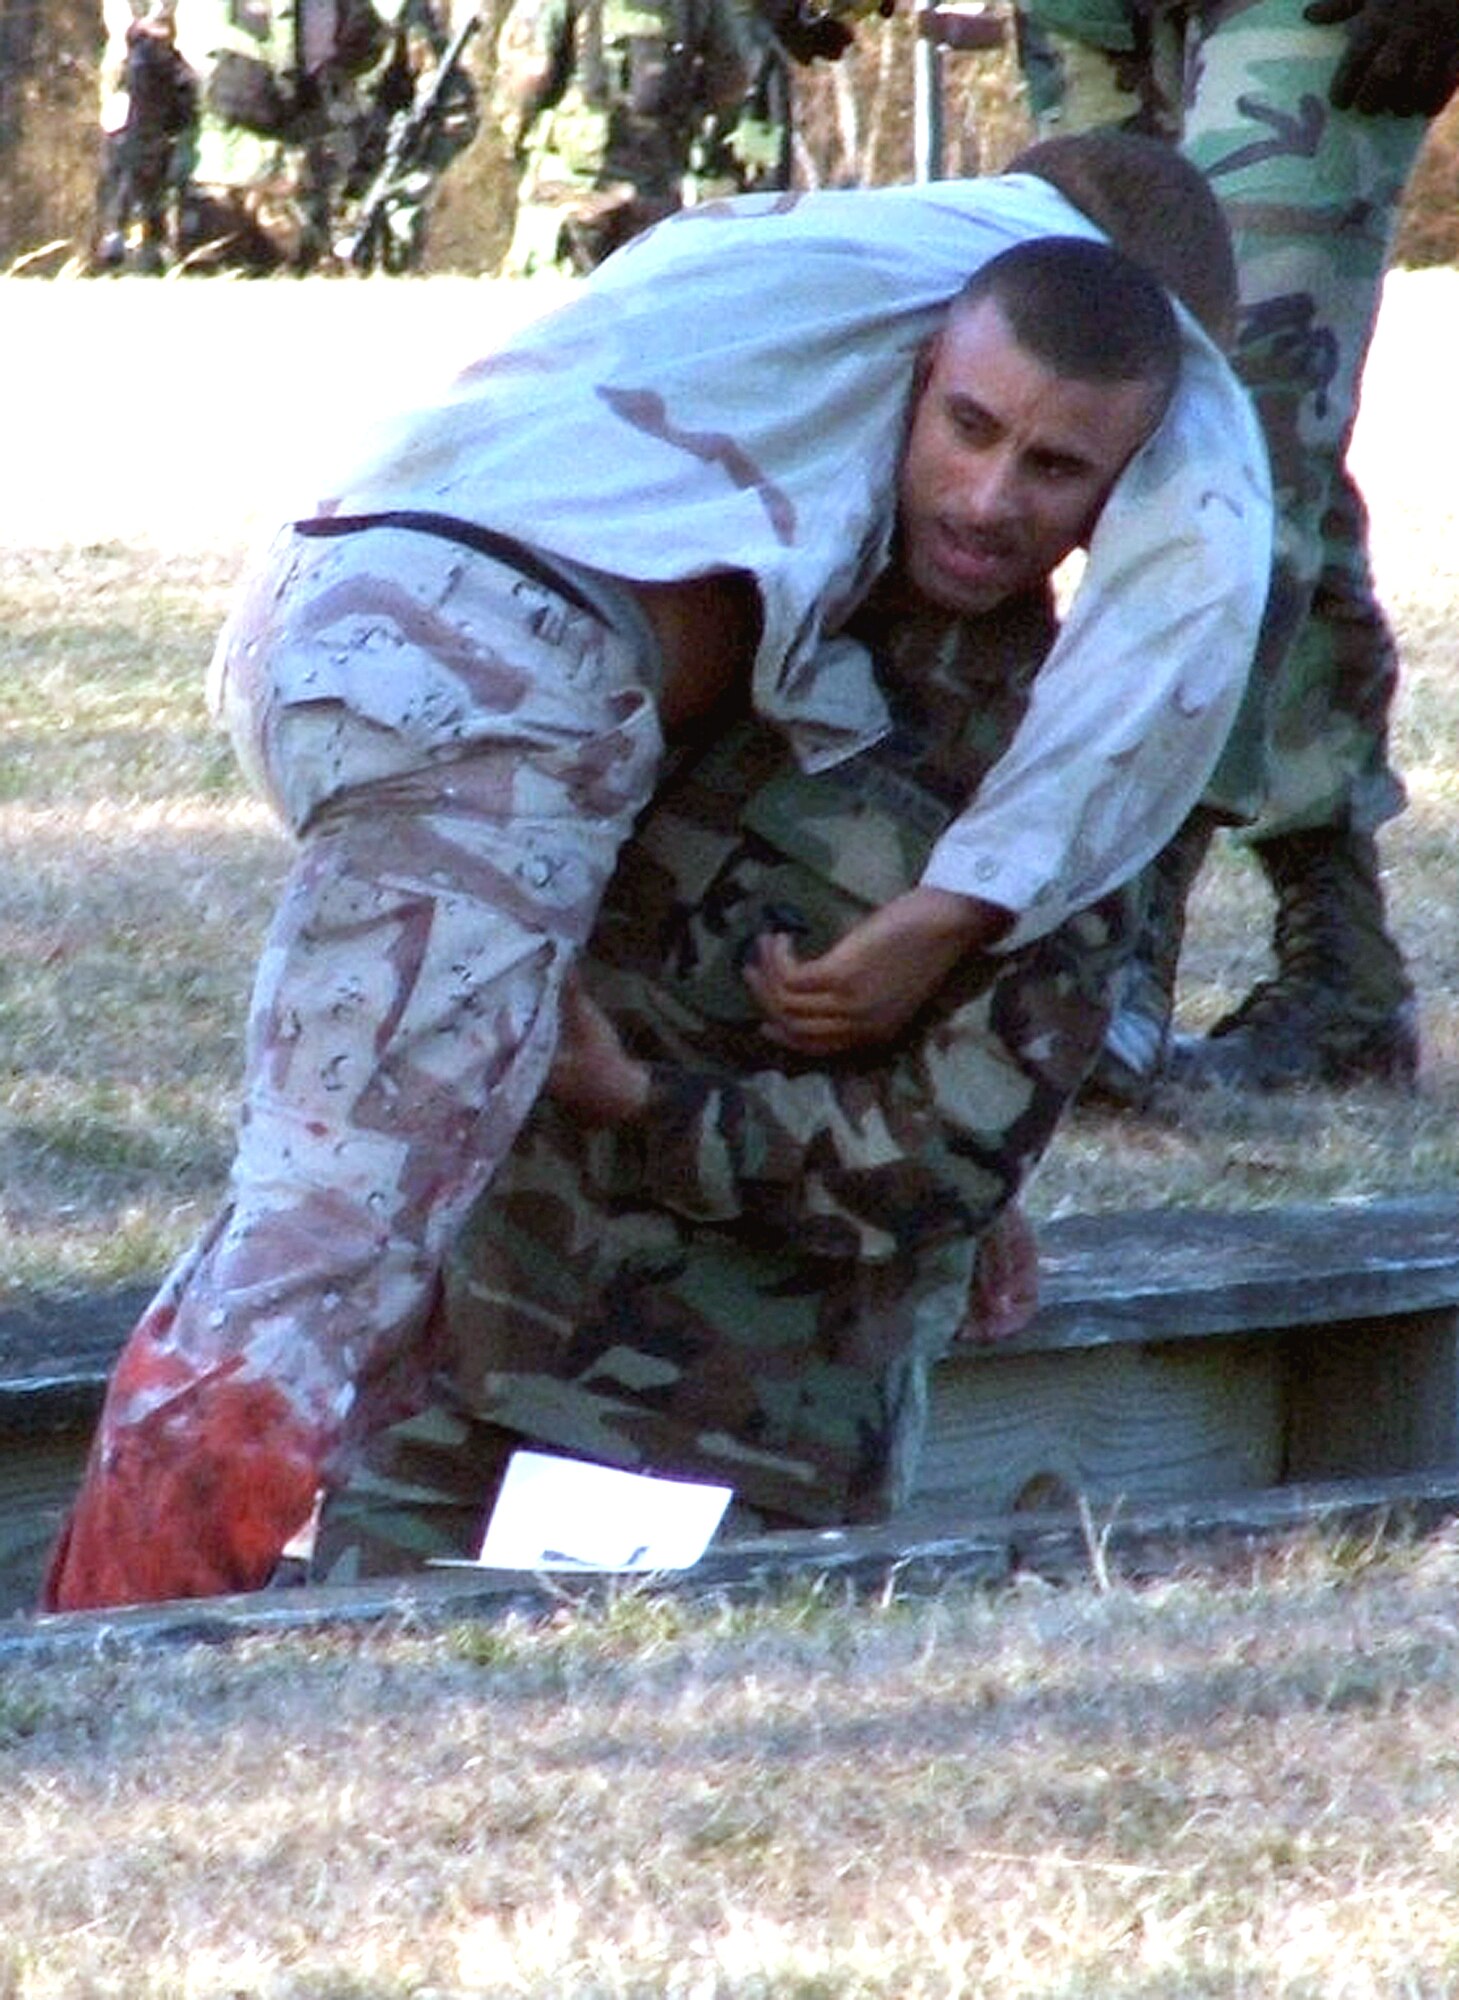 Airman 1st Class Randell Rosado carries a simulated "patient" through an obstacle course during combat first aid training at Air Force Phoenix Raven Course 06-D on Monday, March 27, 2006, at Fort Dix, N.J.  The course is taught by the Air Mobiltiy Warfare Center's 421st Combat Training Squadron.  Airman Rosado is with the 816th Global Mobility Readiness Squadron at McGuire Air Force Base, N.J. (U.S. Air Force photo/Tech. Sgt. Scott T. Sturkol)